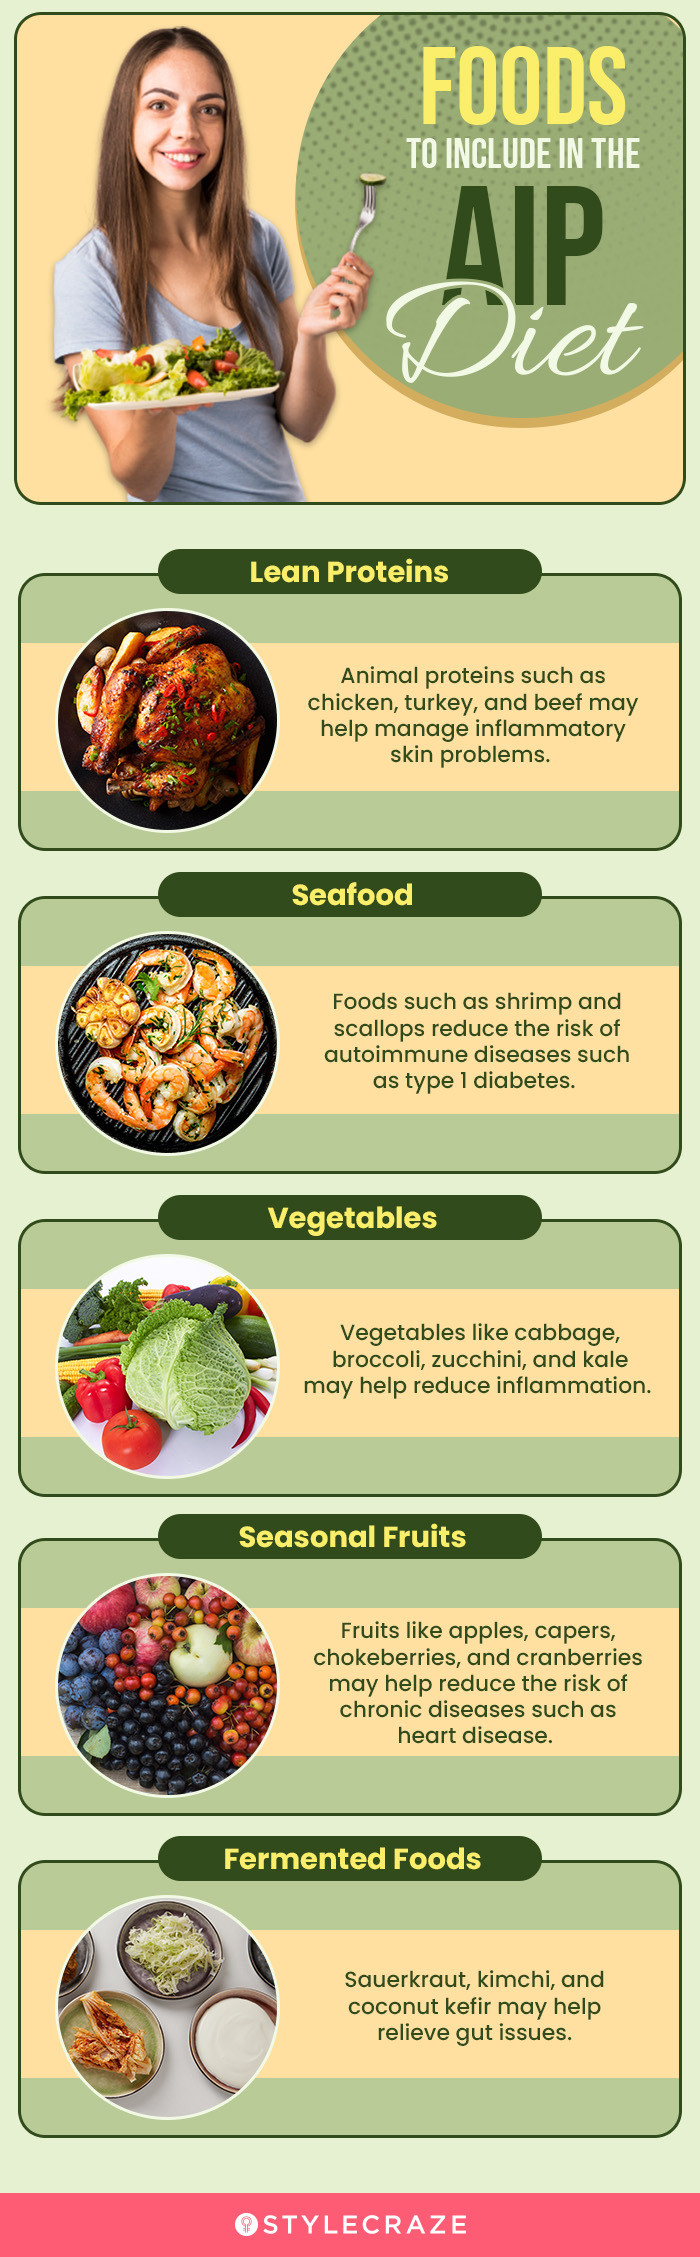 foods to include in the aip diet (infographic)